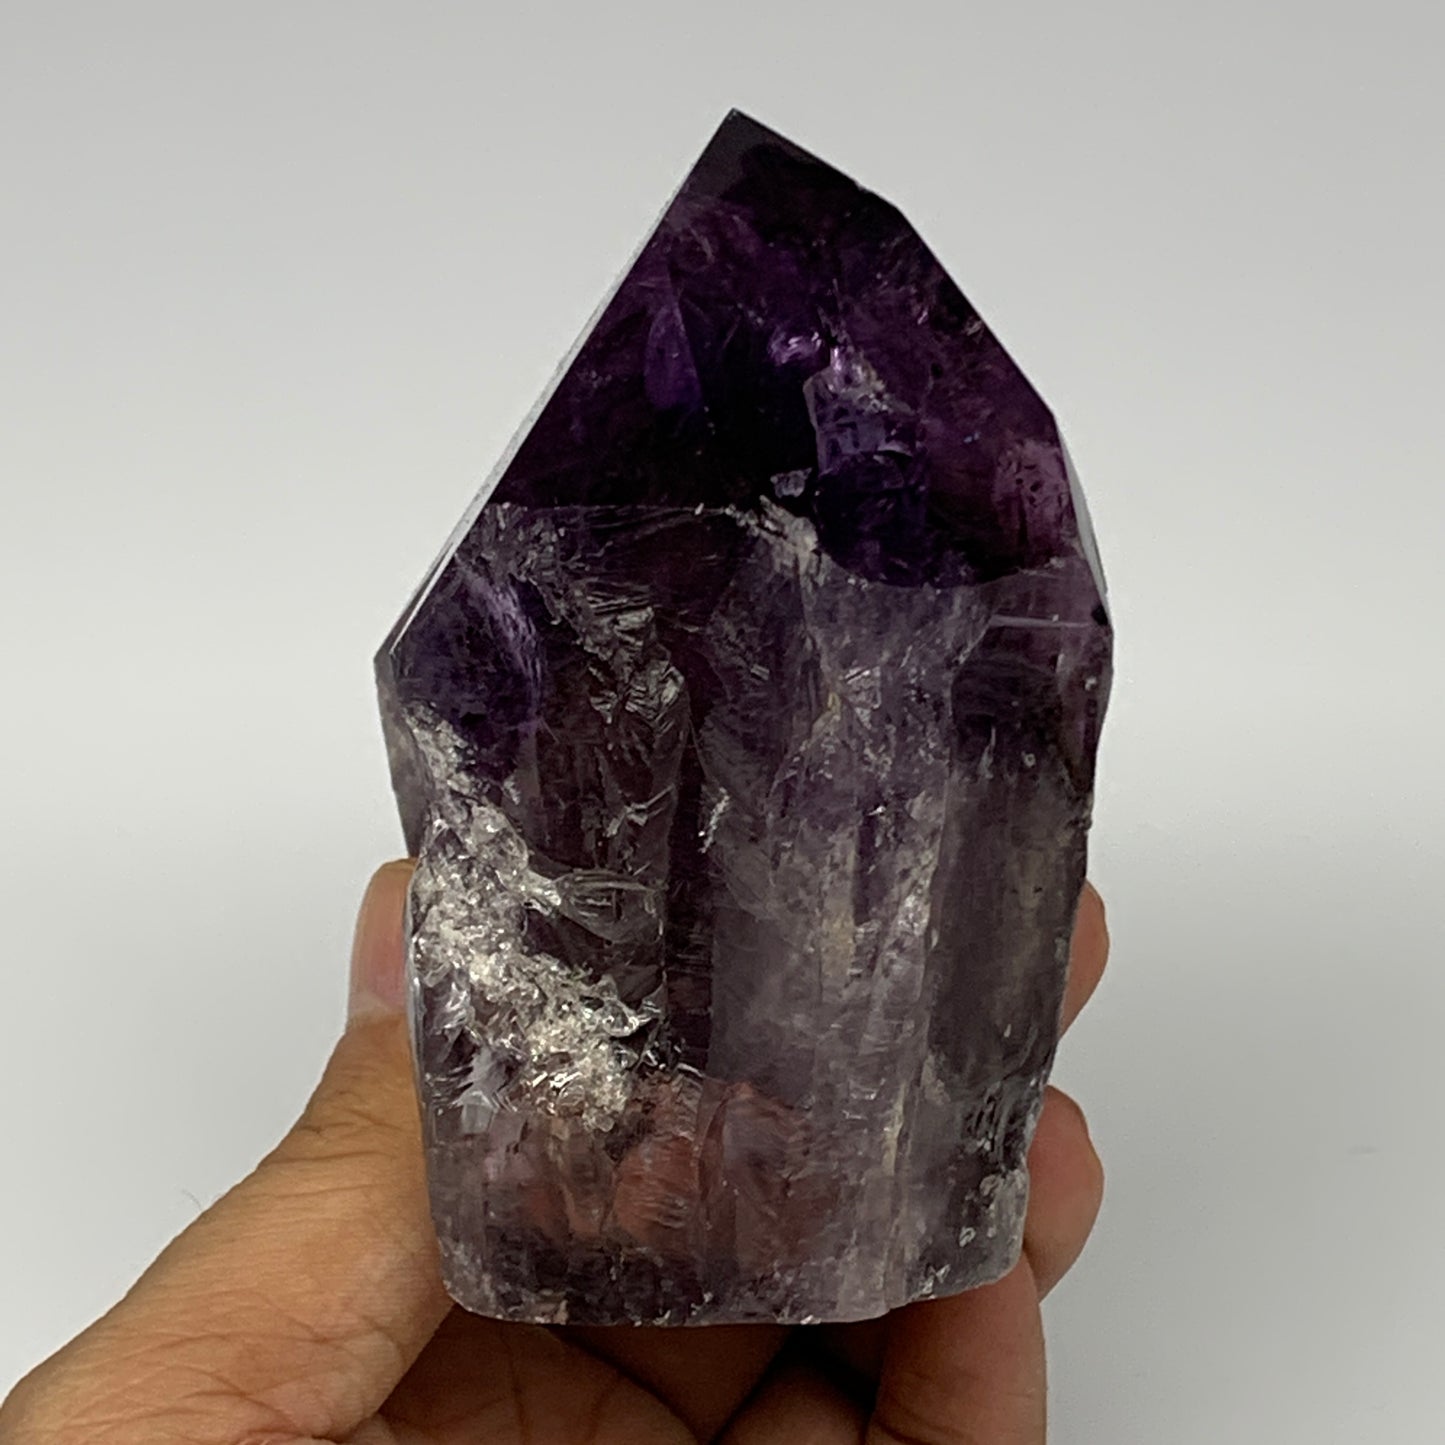 439g,3.7"x2.3"x2.3", Amethyst Point Polished Rough lower part Stands, B19086